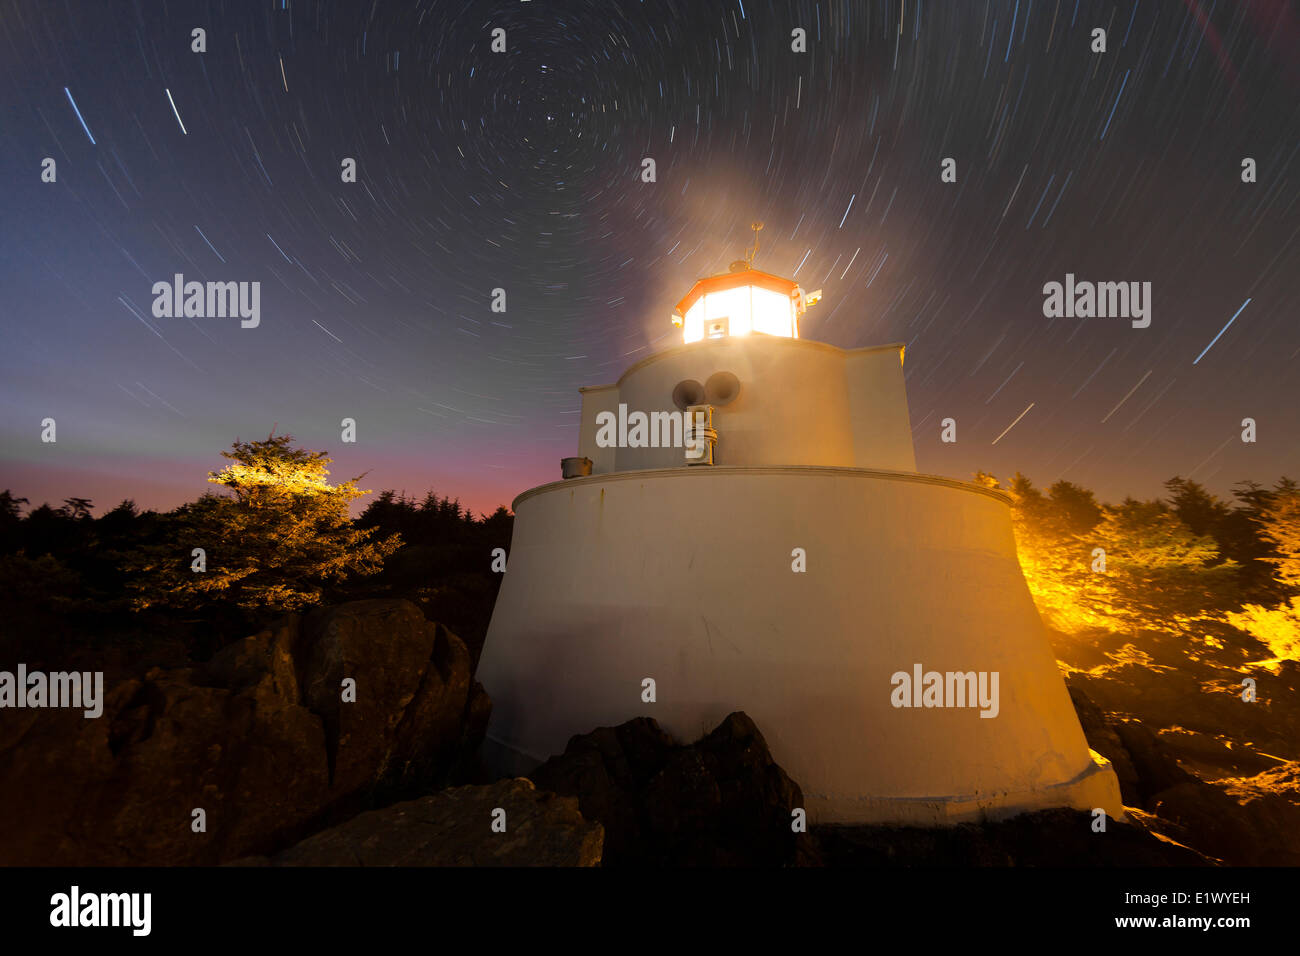 The Amphrite lighthouse in Ucluelet, photographed at night. Ucluelet,  Vancouver Island, British Columbia, Canada Stock Photo